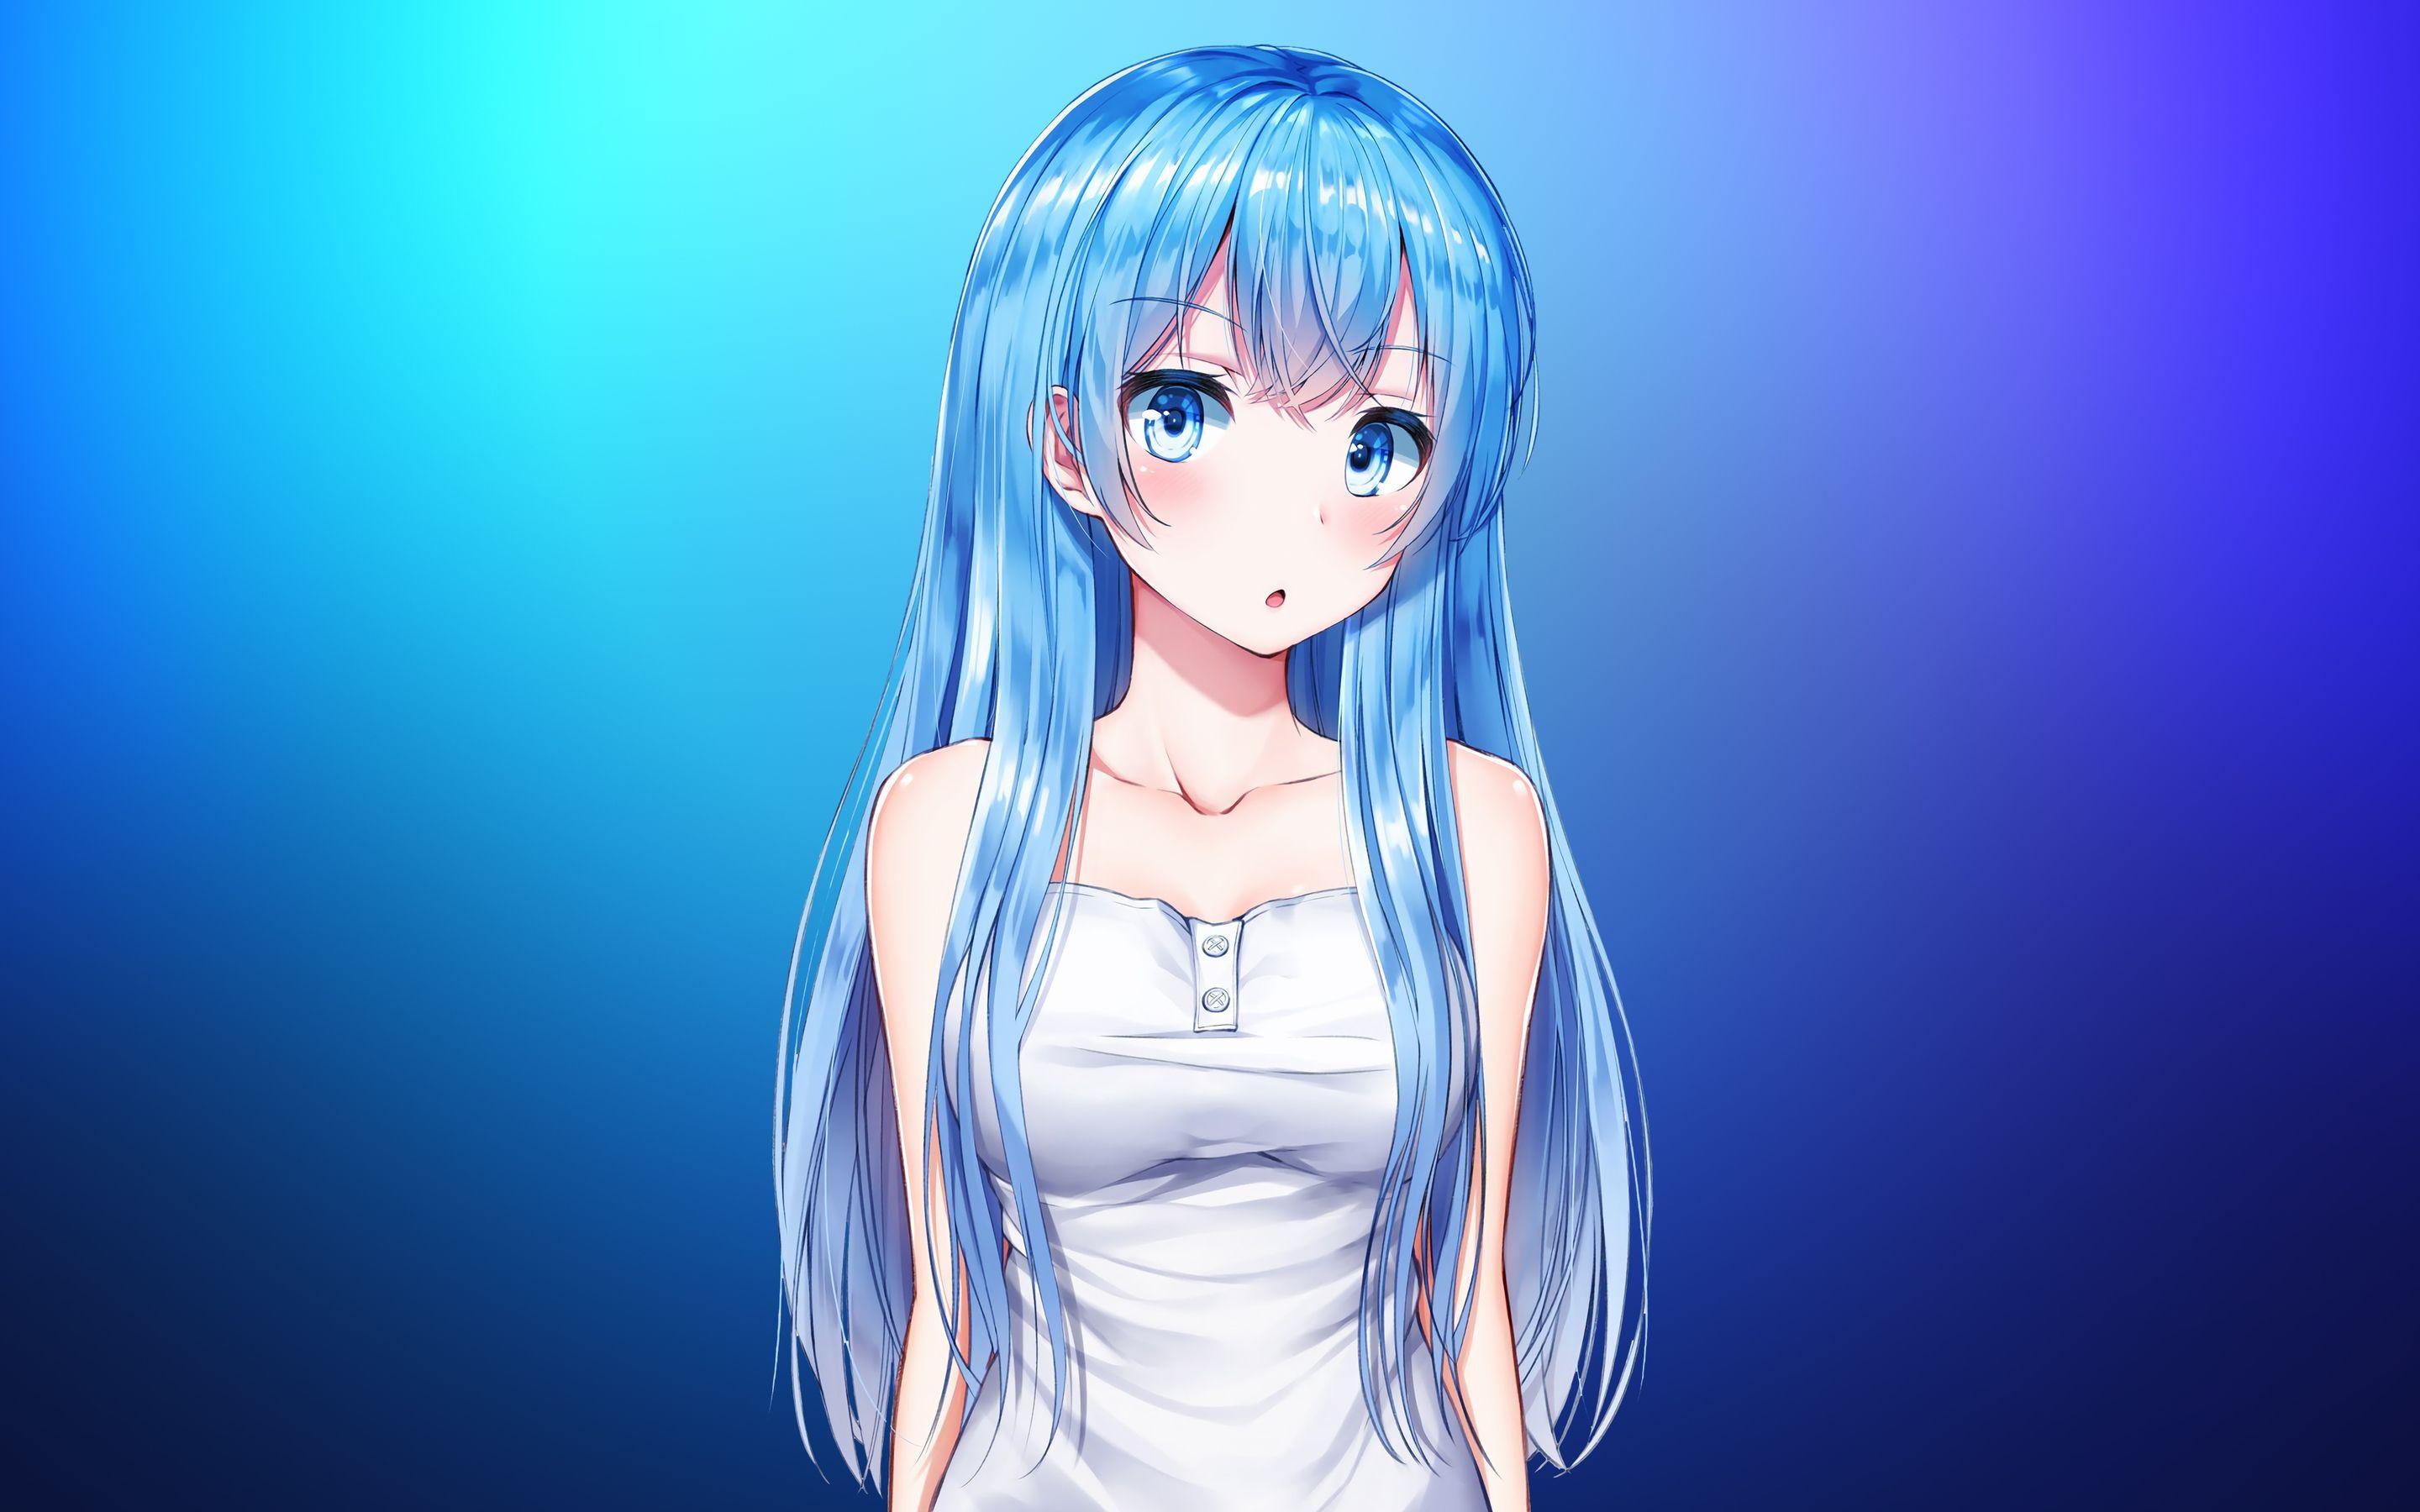 Cool Anime Girl Pictures Wallpapers - Wallpaper Cave